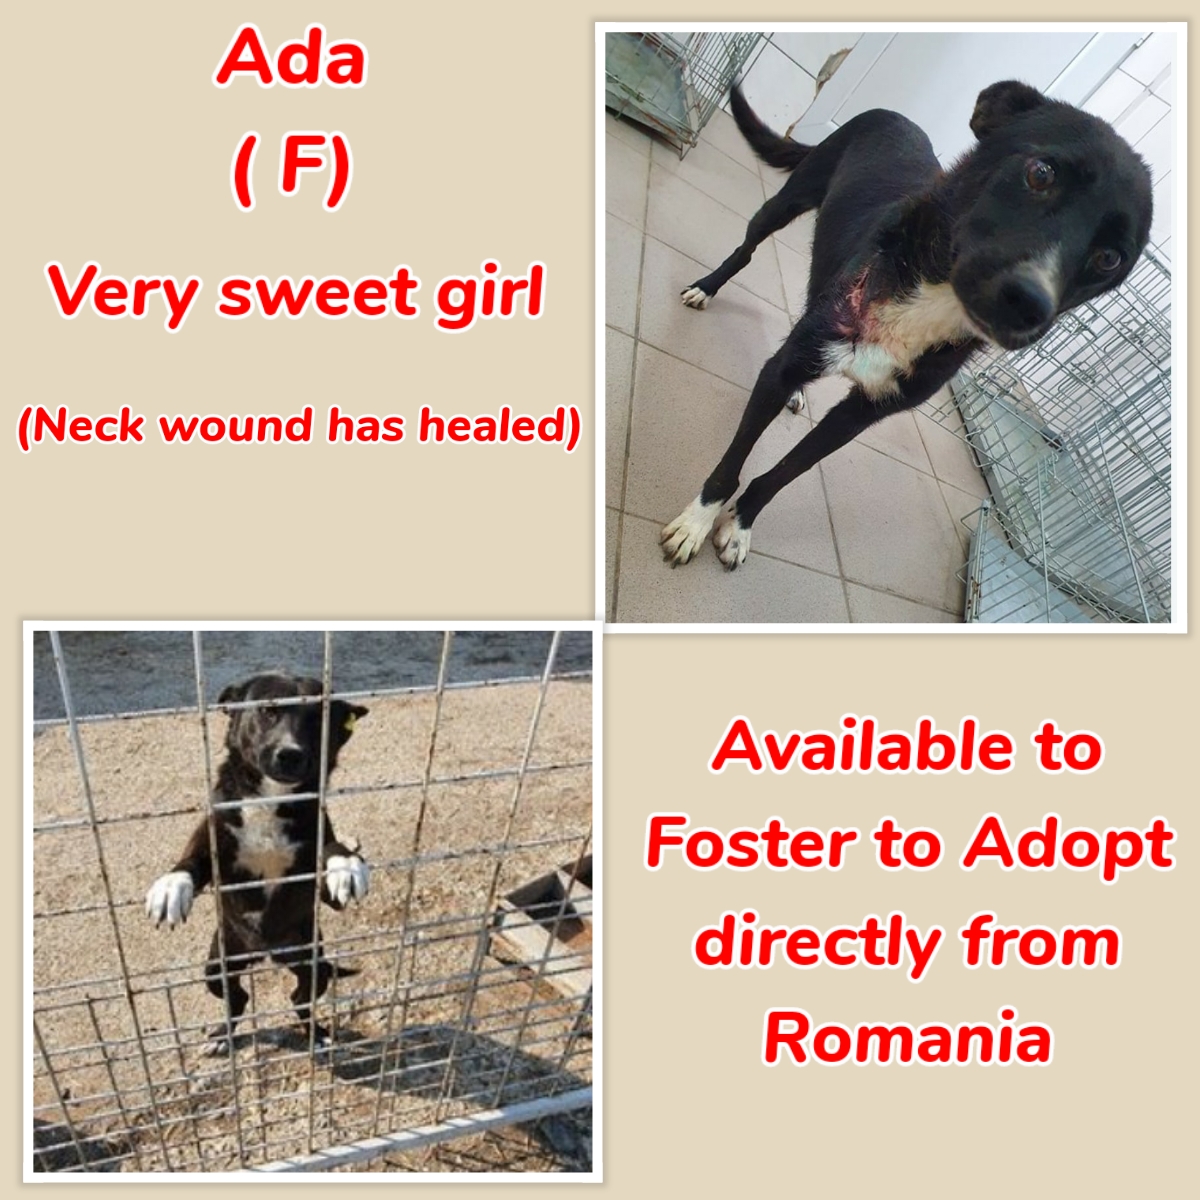 Dogs available to Foster to Adopt (F2A) Ada ( F) Ada is a very sweet, friendly girl. She did have a nasty wound on her neck but this has now healed. Ada can be Fostered to Adopt directly from Romania. For more information, go to bit.ly/IDRF2A #TeamZay #F2A